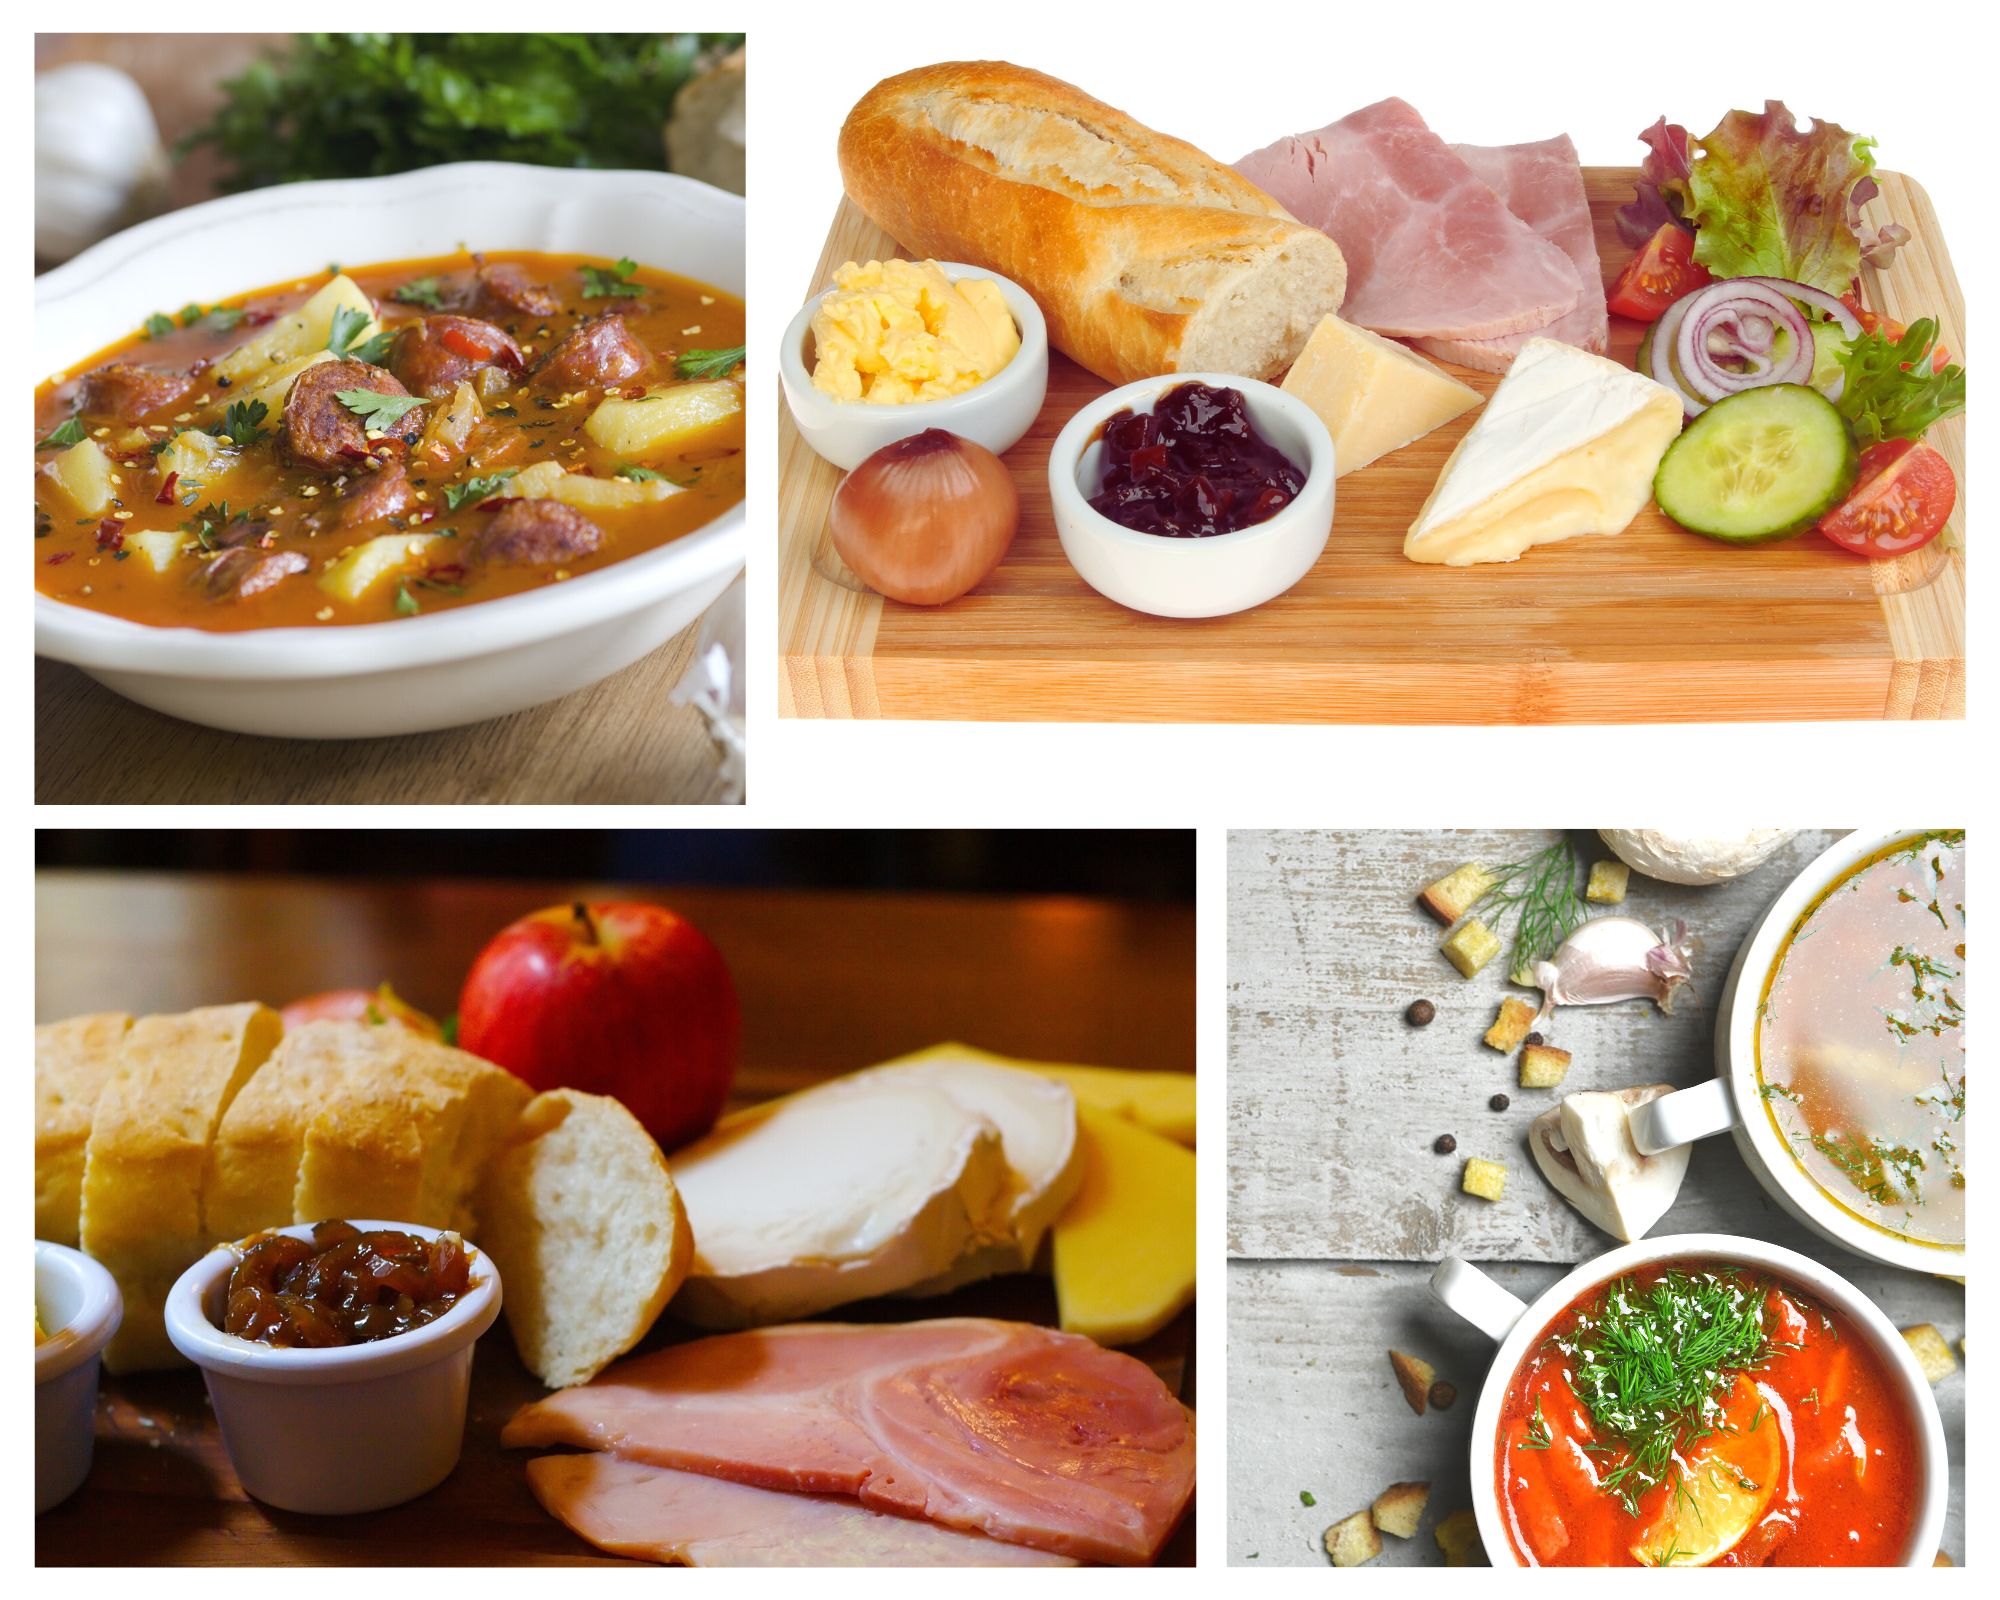 Split Screen: Bowls of soup; wooden board with wedges of cheese, sliced meats, bread, apples, and butter.